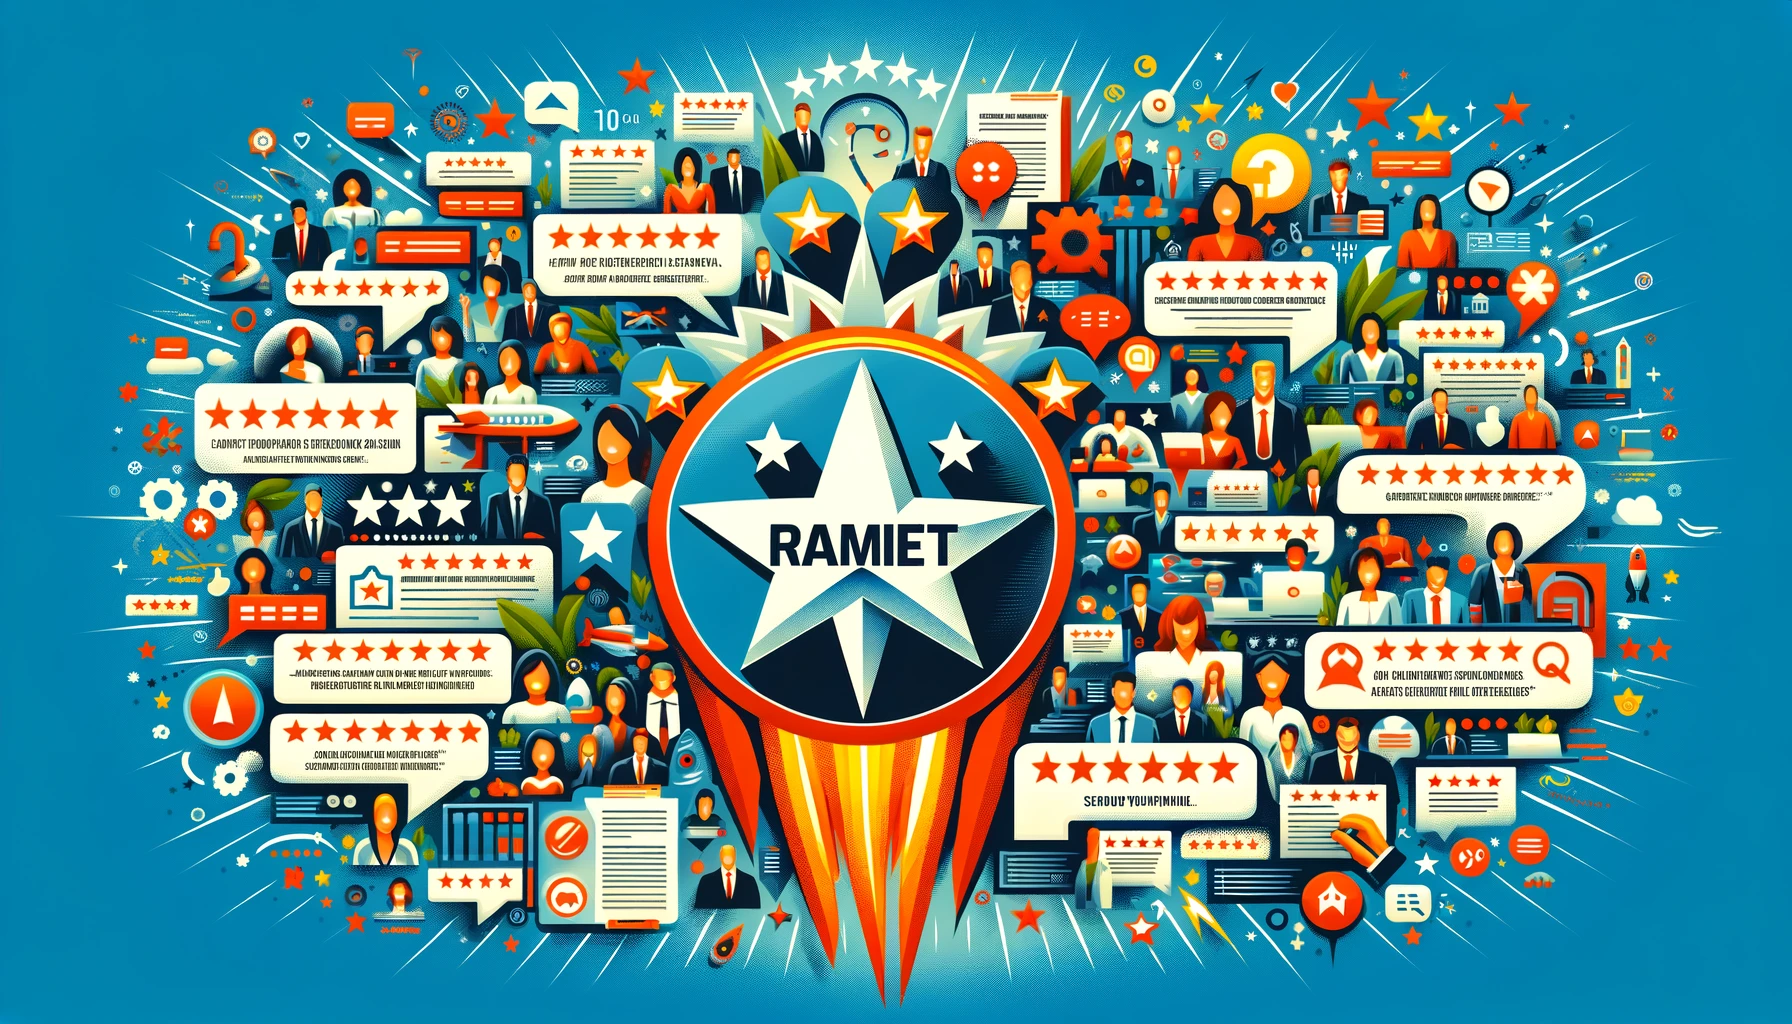 Ramjet Reviews - See What Others Say About Us